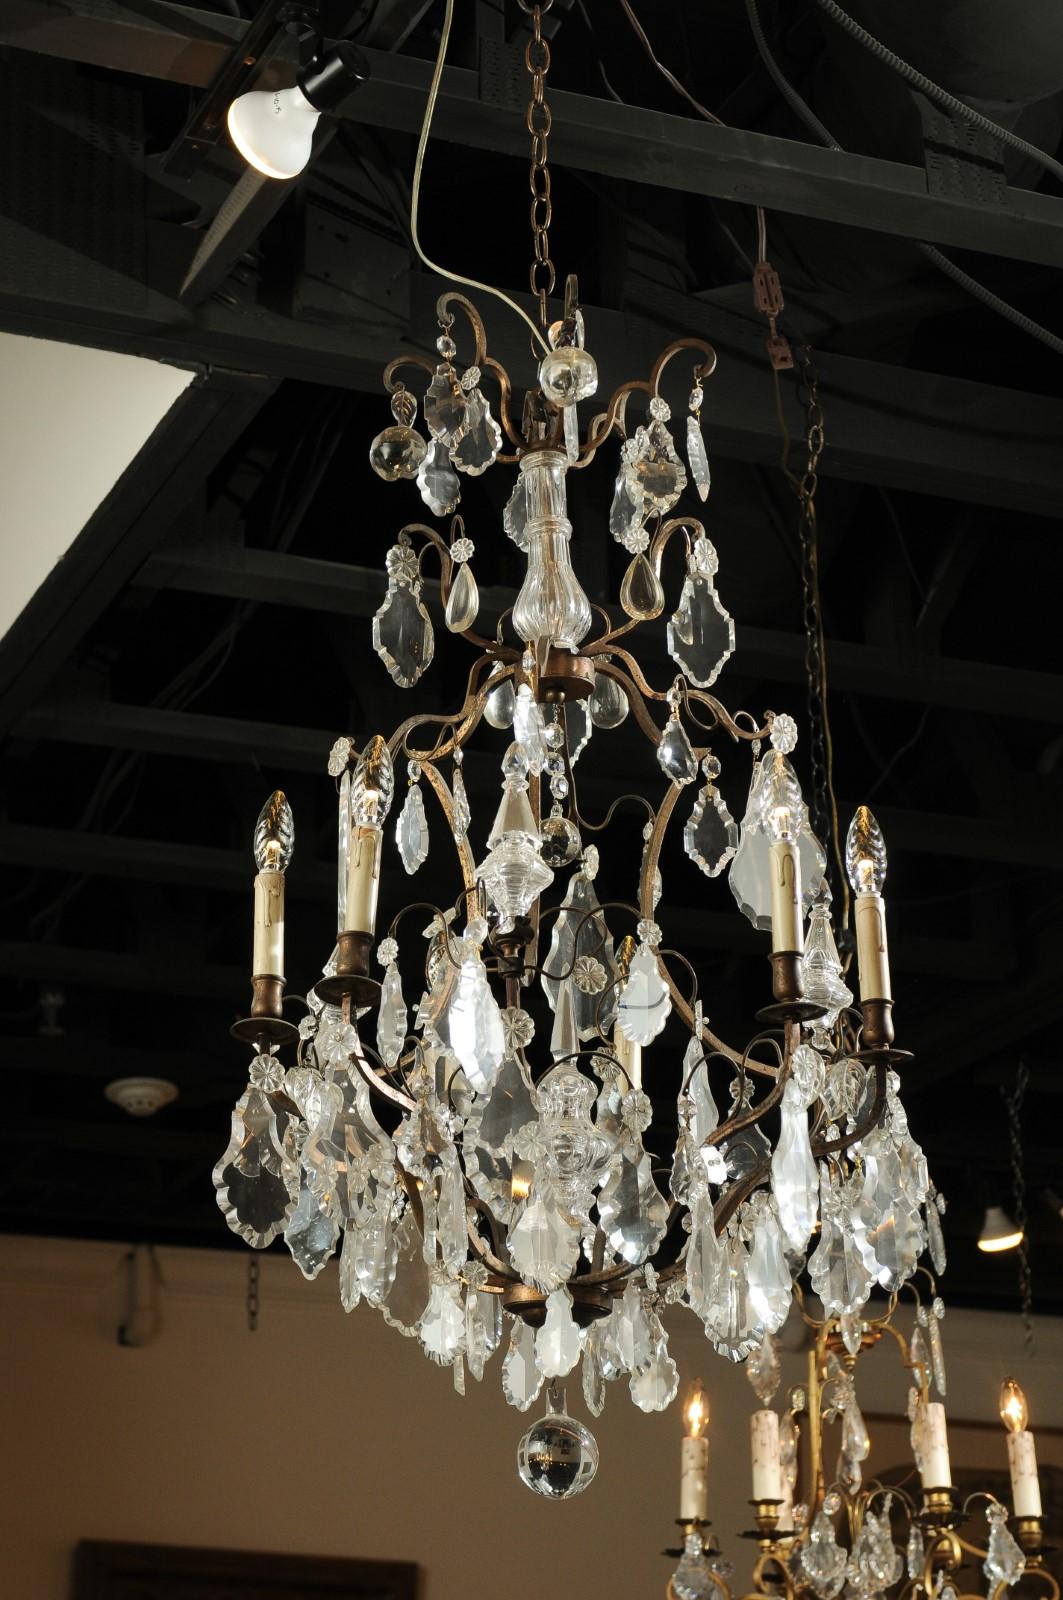 French Six-Light Crystal and Iron Chandelier with Obelisks, Late 19th Century For Sale 1